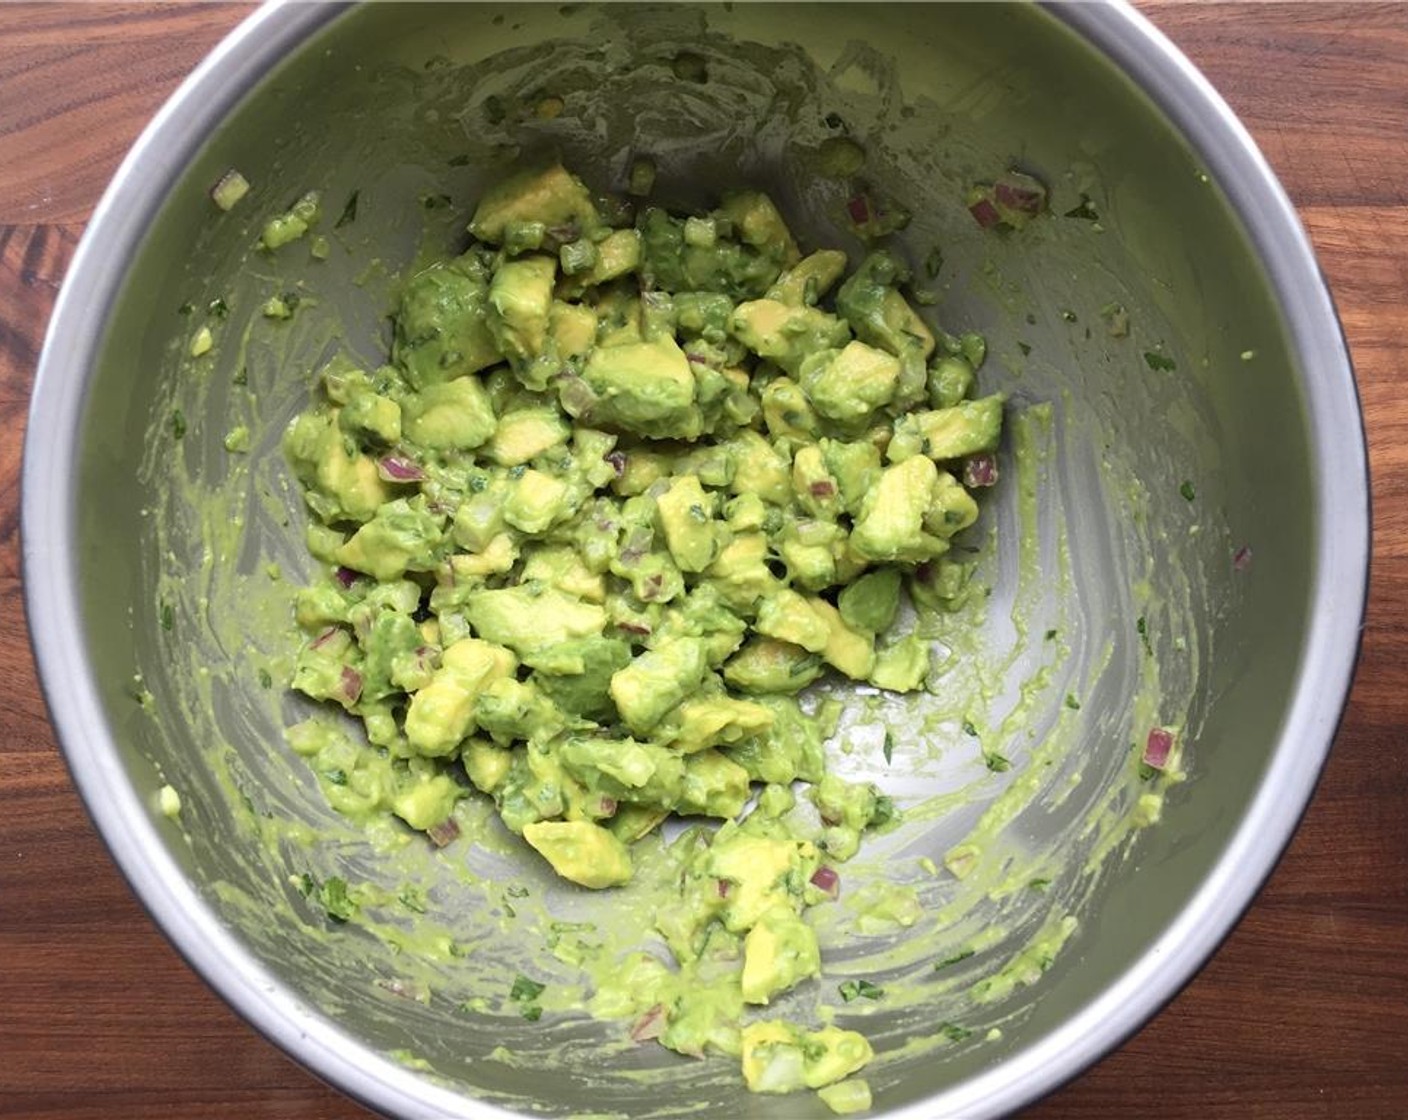 step 8 Combine the diced ripe avocados, juice from Lime (1), Fresh Cilantro (1 Tbsp), Red Onions (2 Tbsp), Extra-Virgin Olive Oil (1 Tbsp) and Kosher Salt (1/4 tsp). Mix well and refrigerate until ready to use.